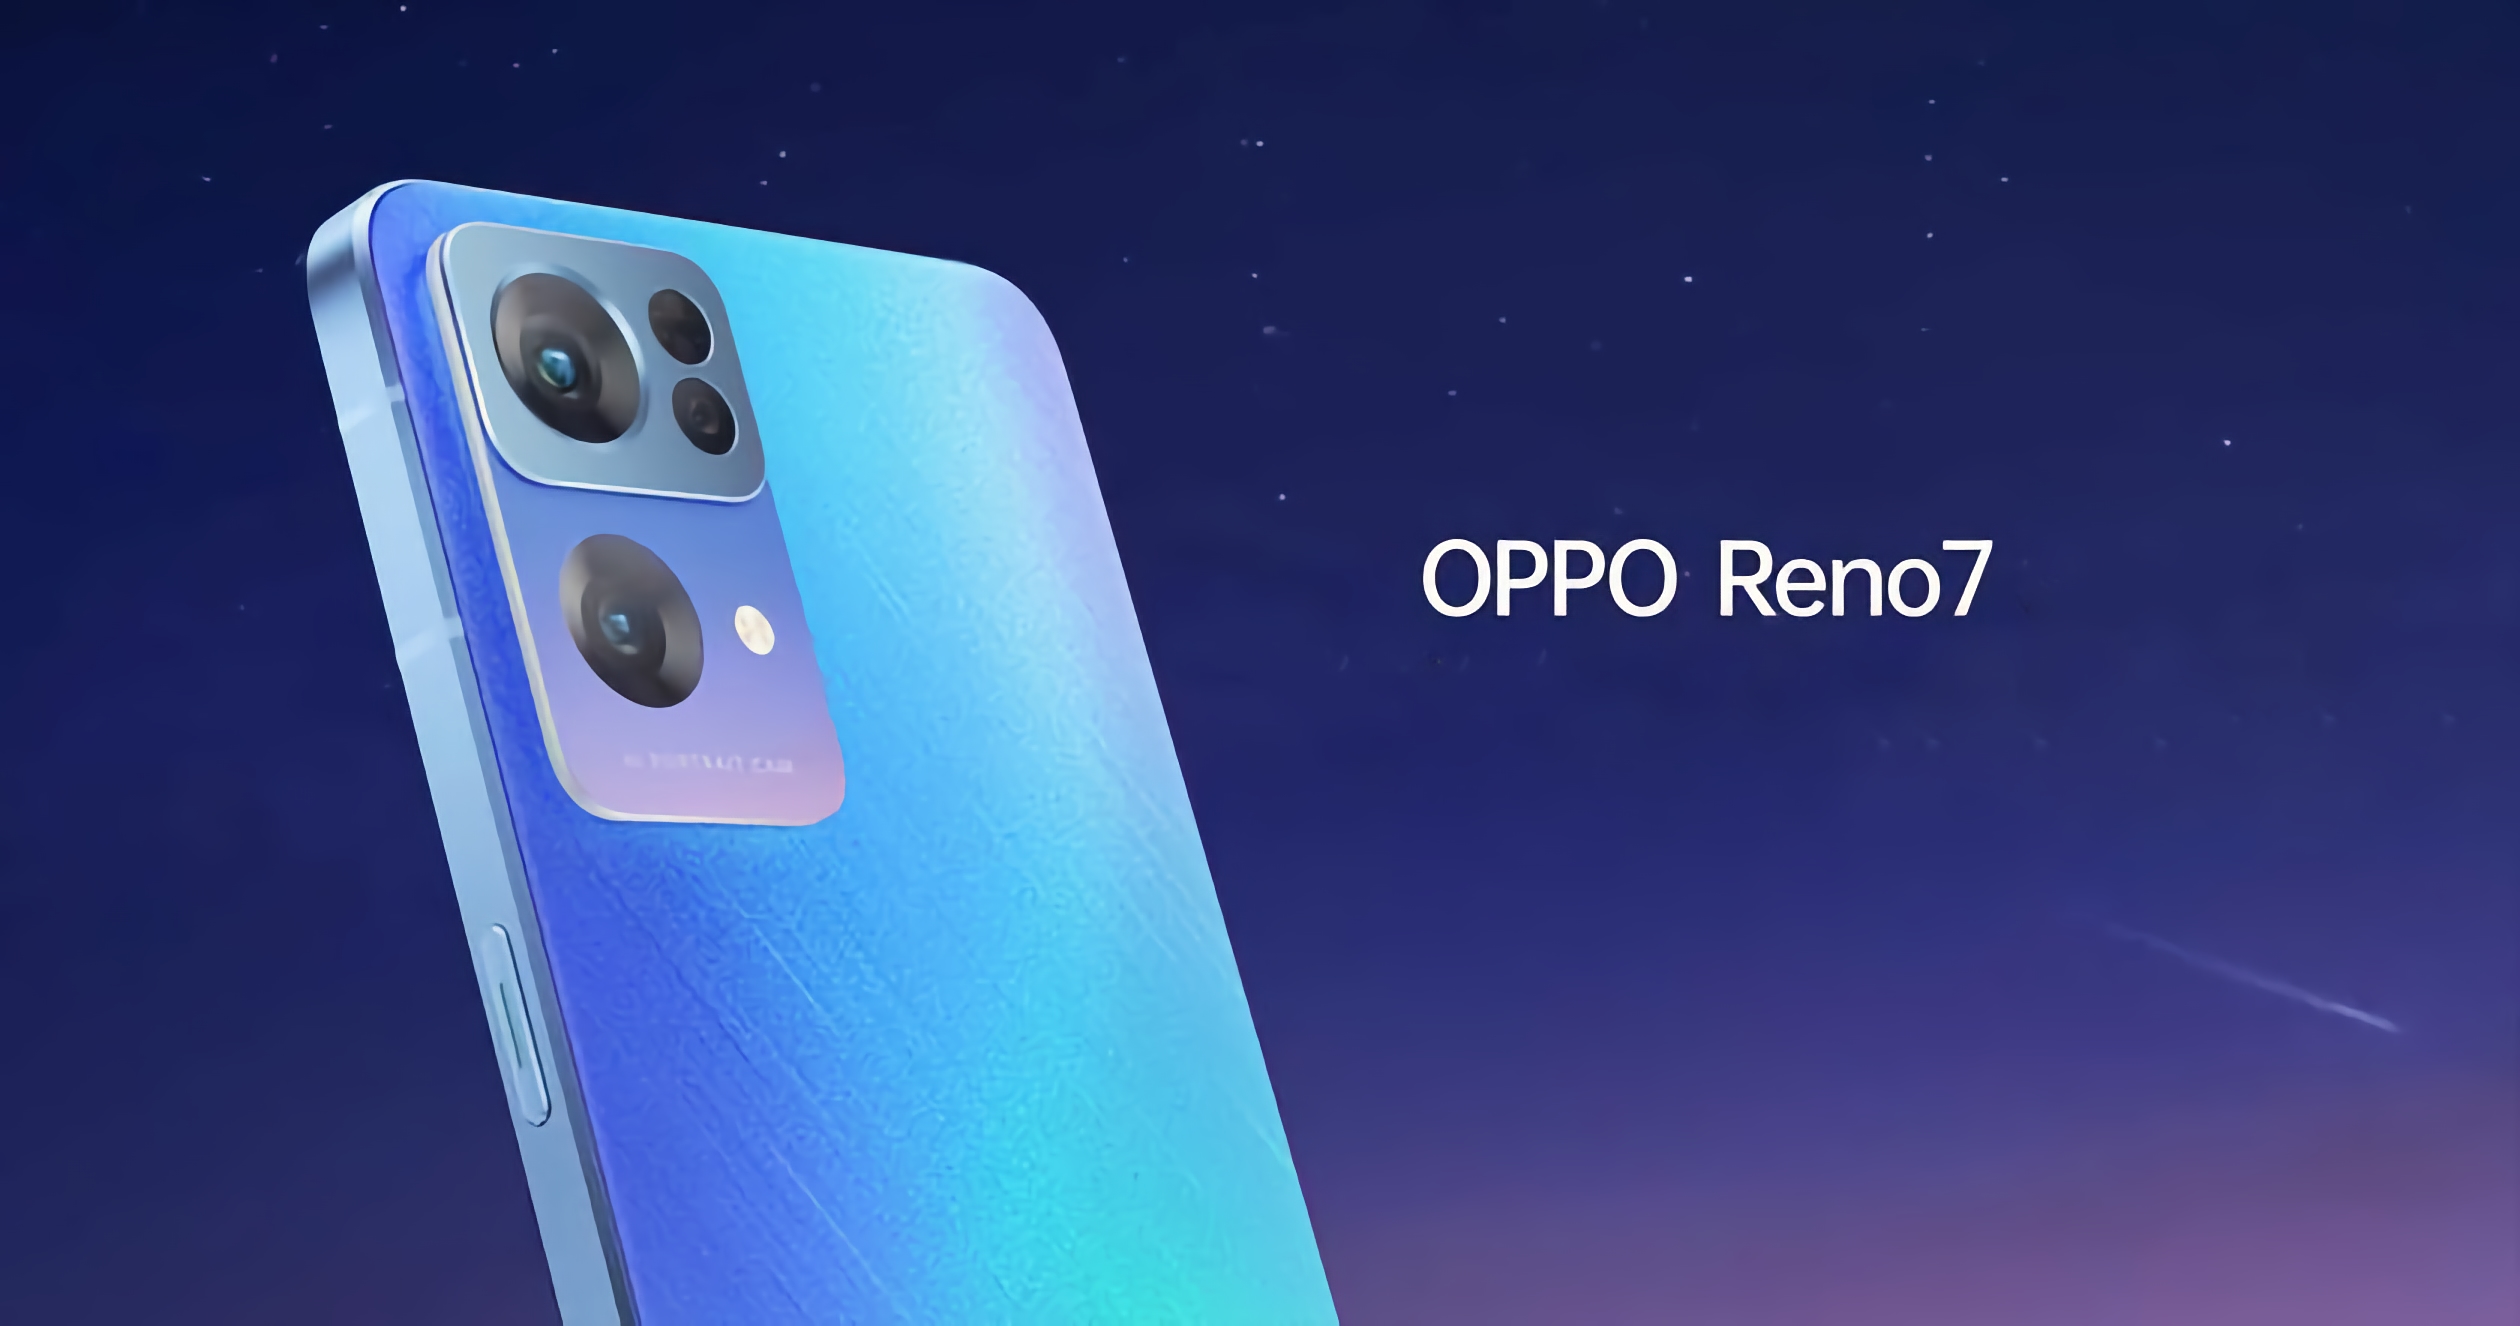 3 days before the announcement: images and characteristics of smartphones OPPO Reno 7, OPPO Reno 7 Pro and OPPO Reno 7 SE leaked to the network